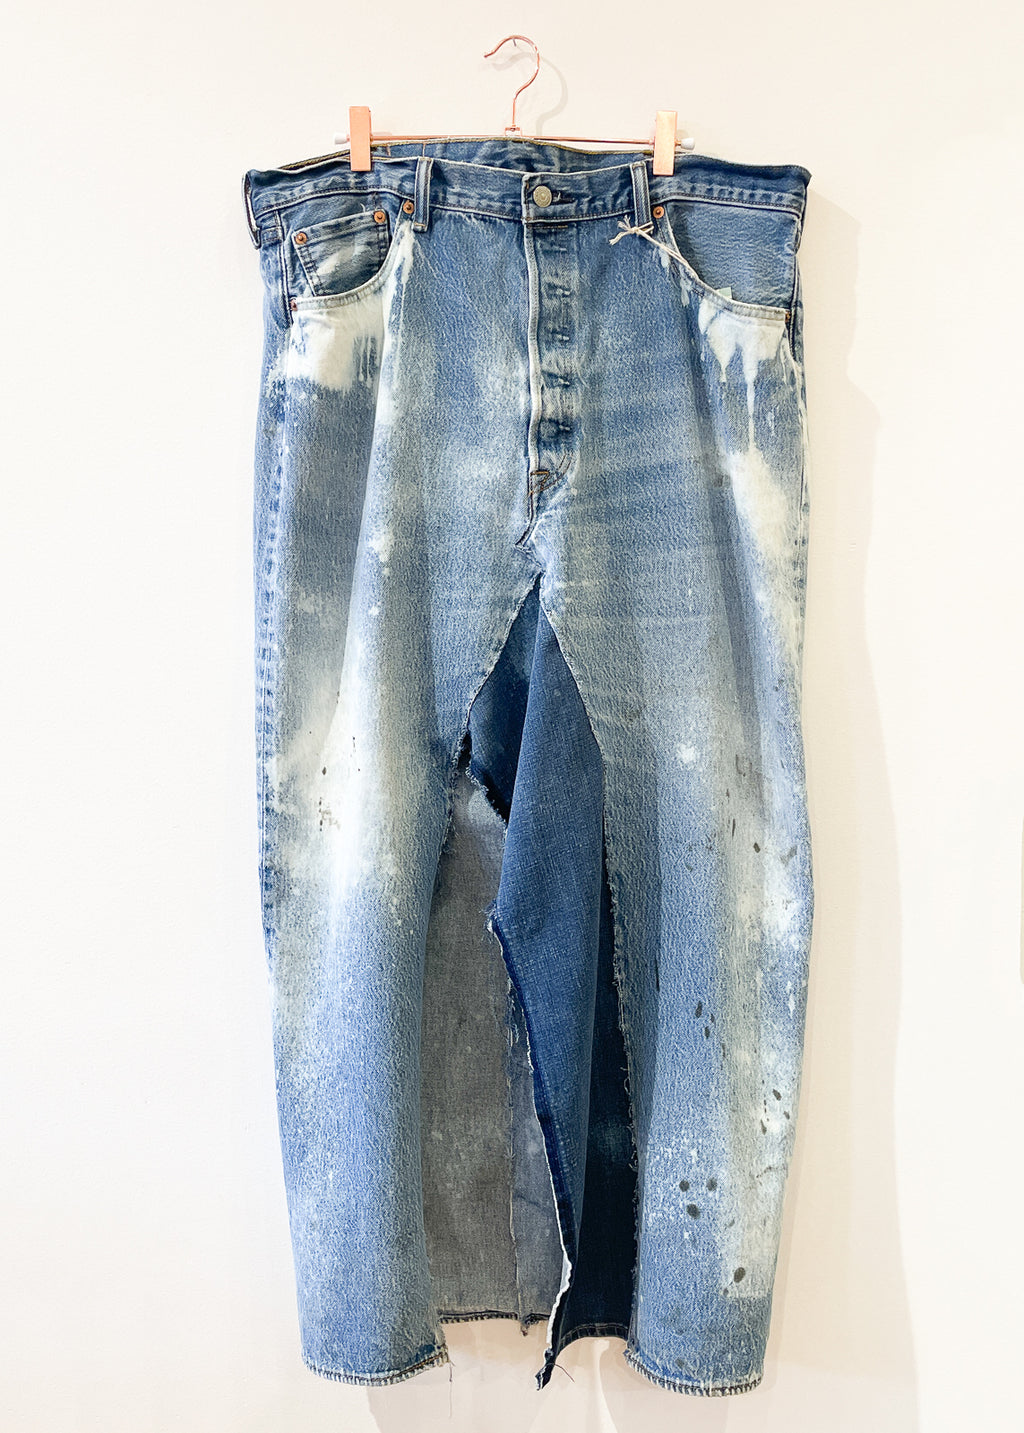 Denim Maxi | Everything and My Maxi is Bleached | Les Sol | Minneapolis